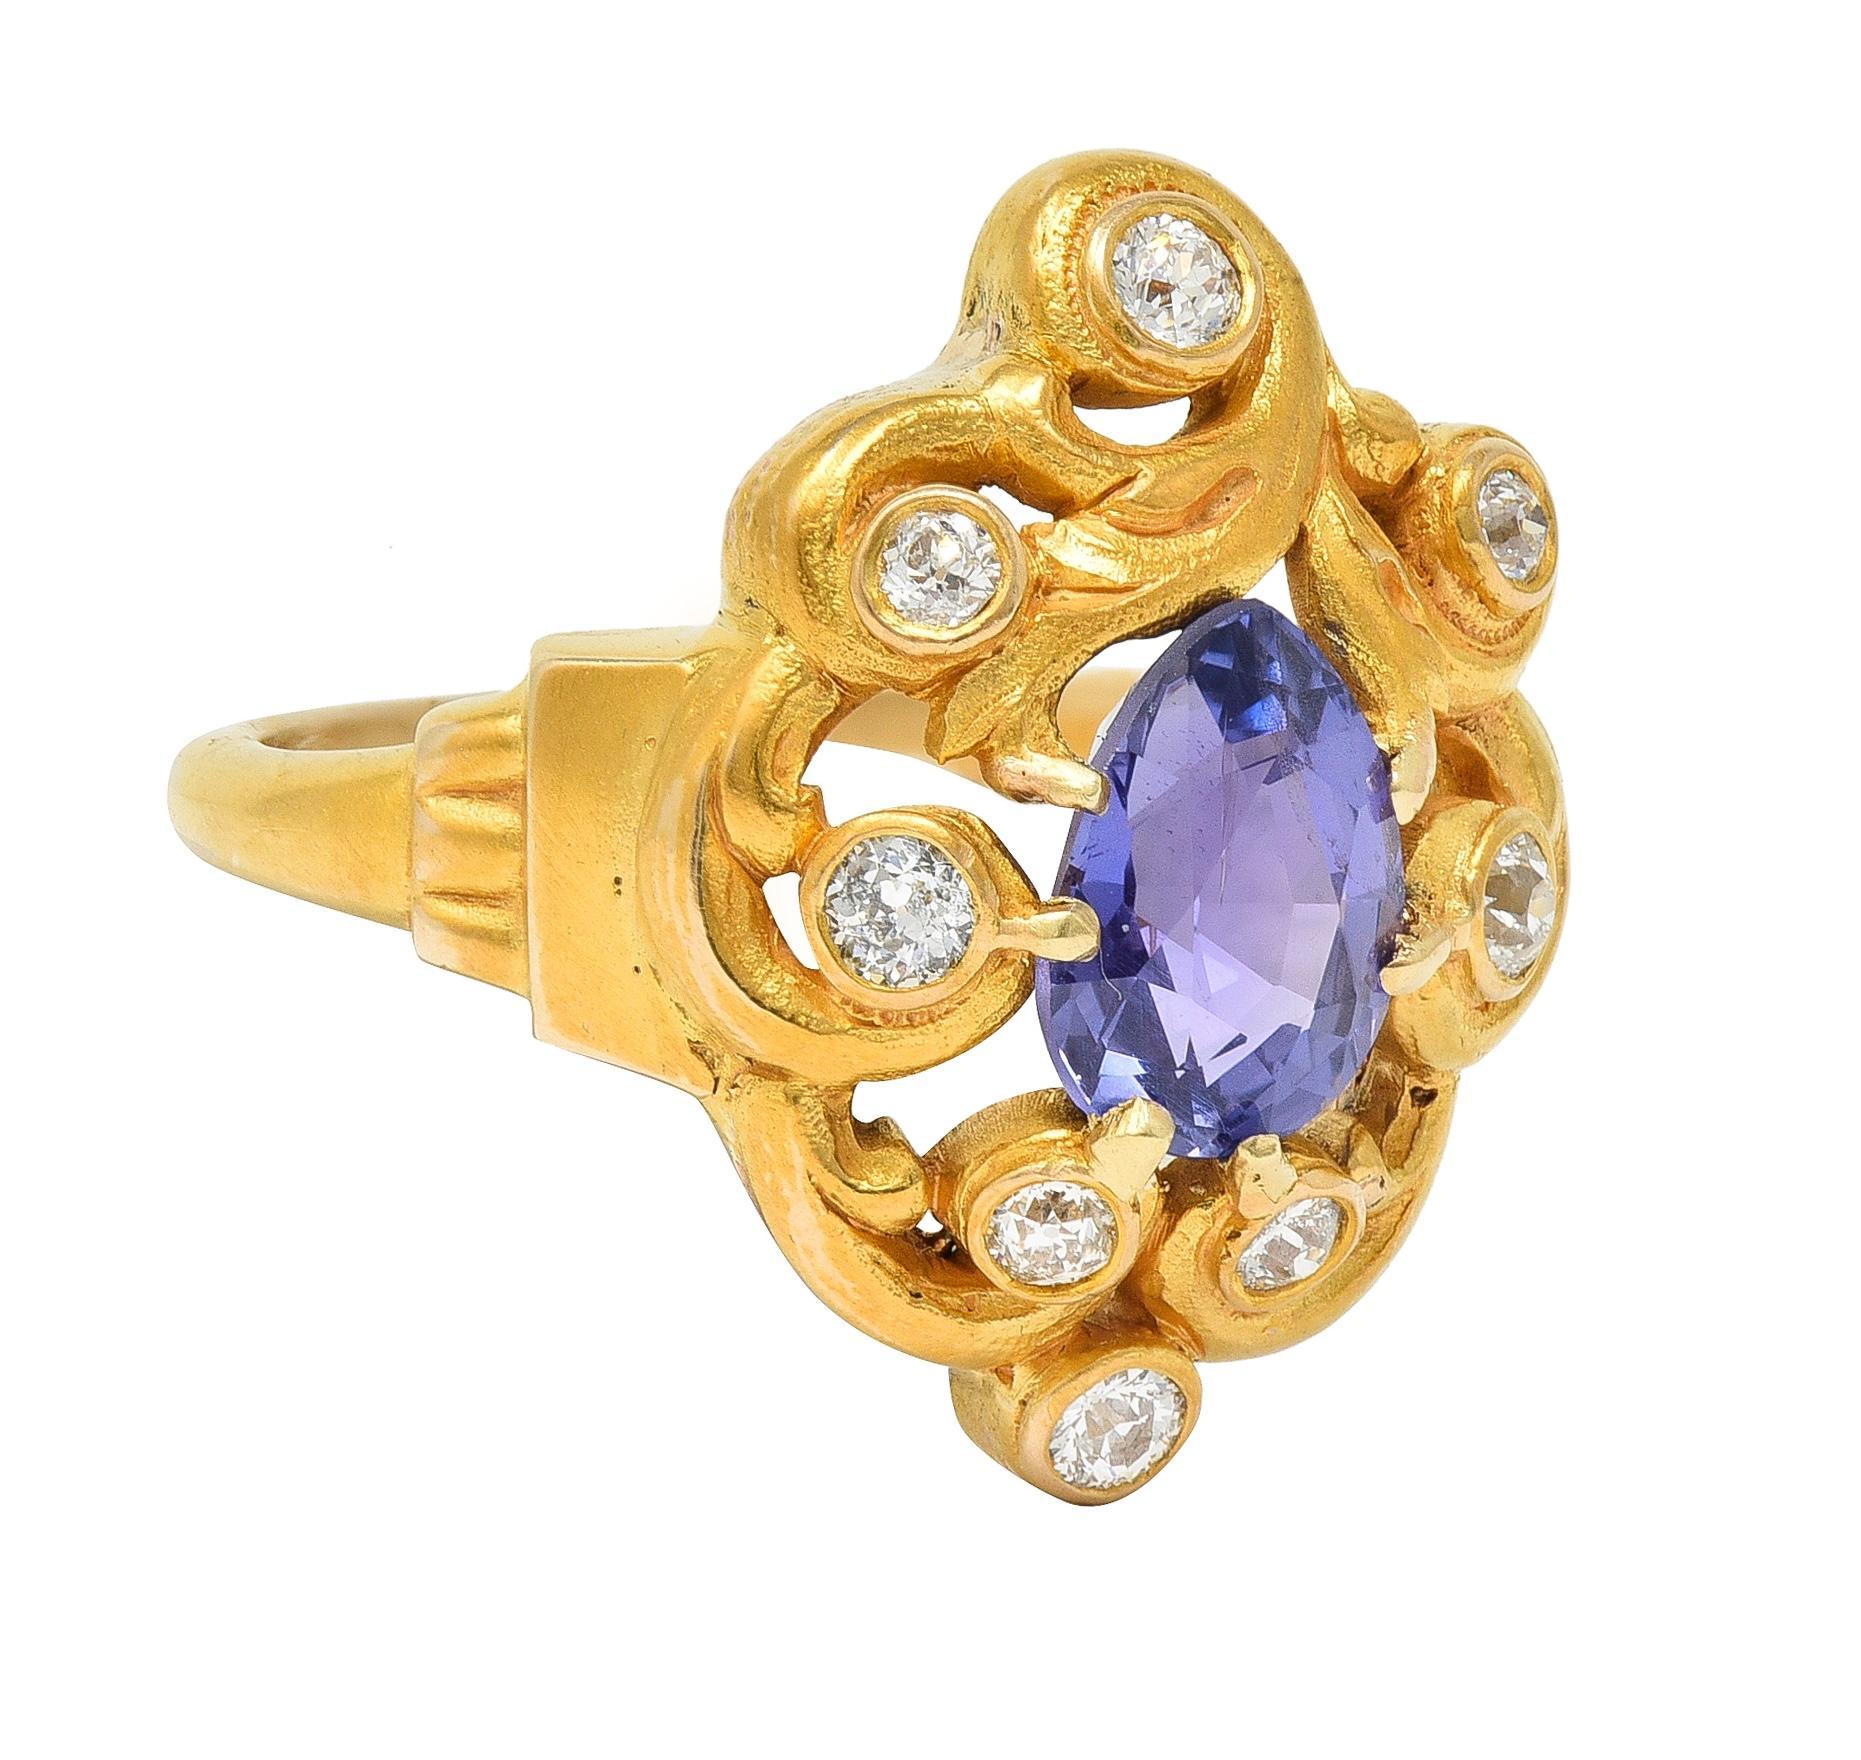 Centering a pear-cut sapphire weighing approximately 2.05 carats - transparent medium violet in color
Natural Ceylon in origin with no indications of heat treatment - prong set 
With a pierced openwork scroll motif surround bezel set with